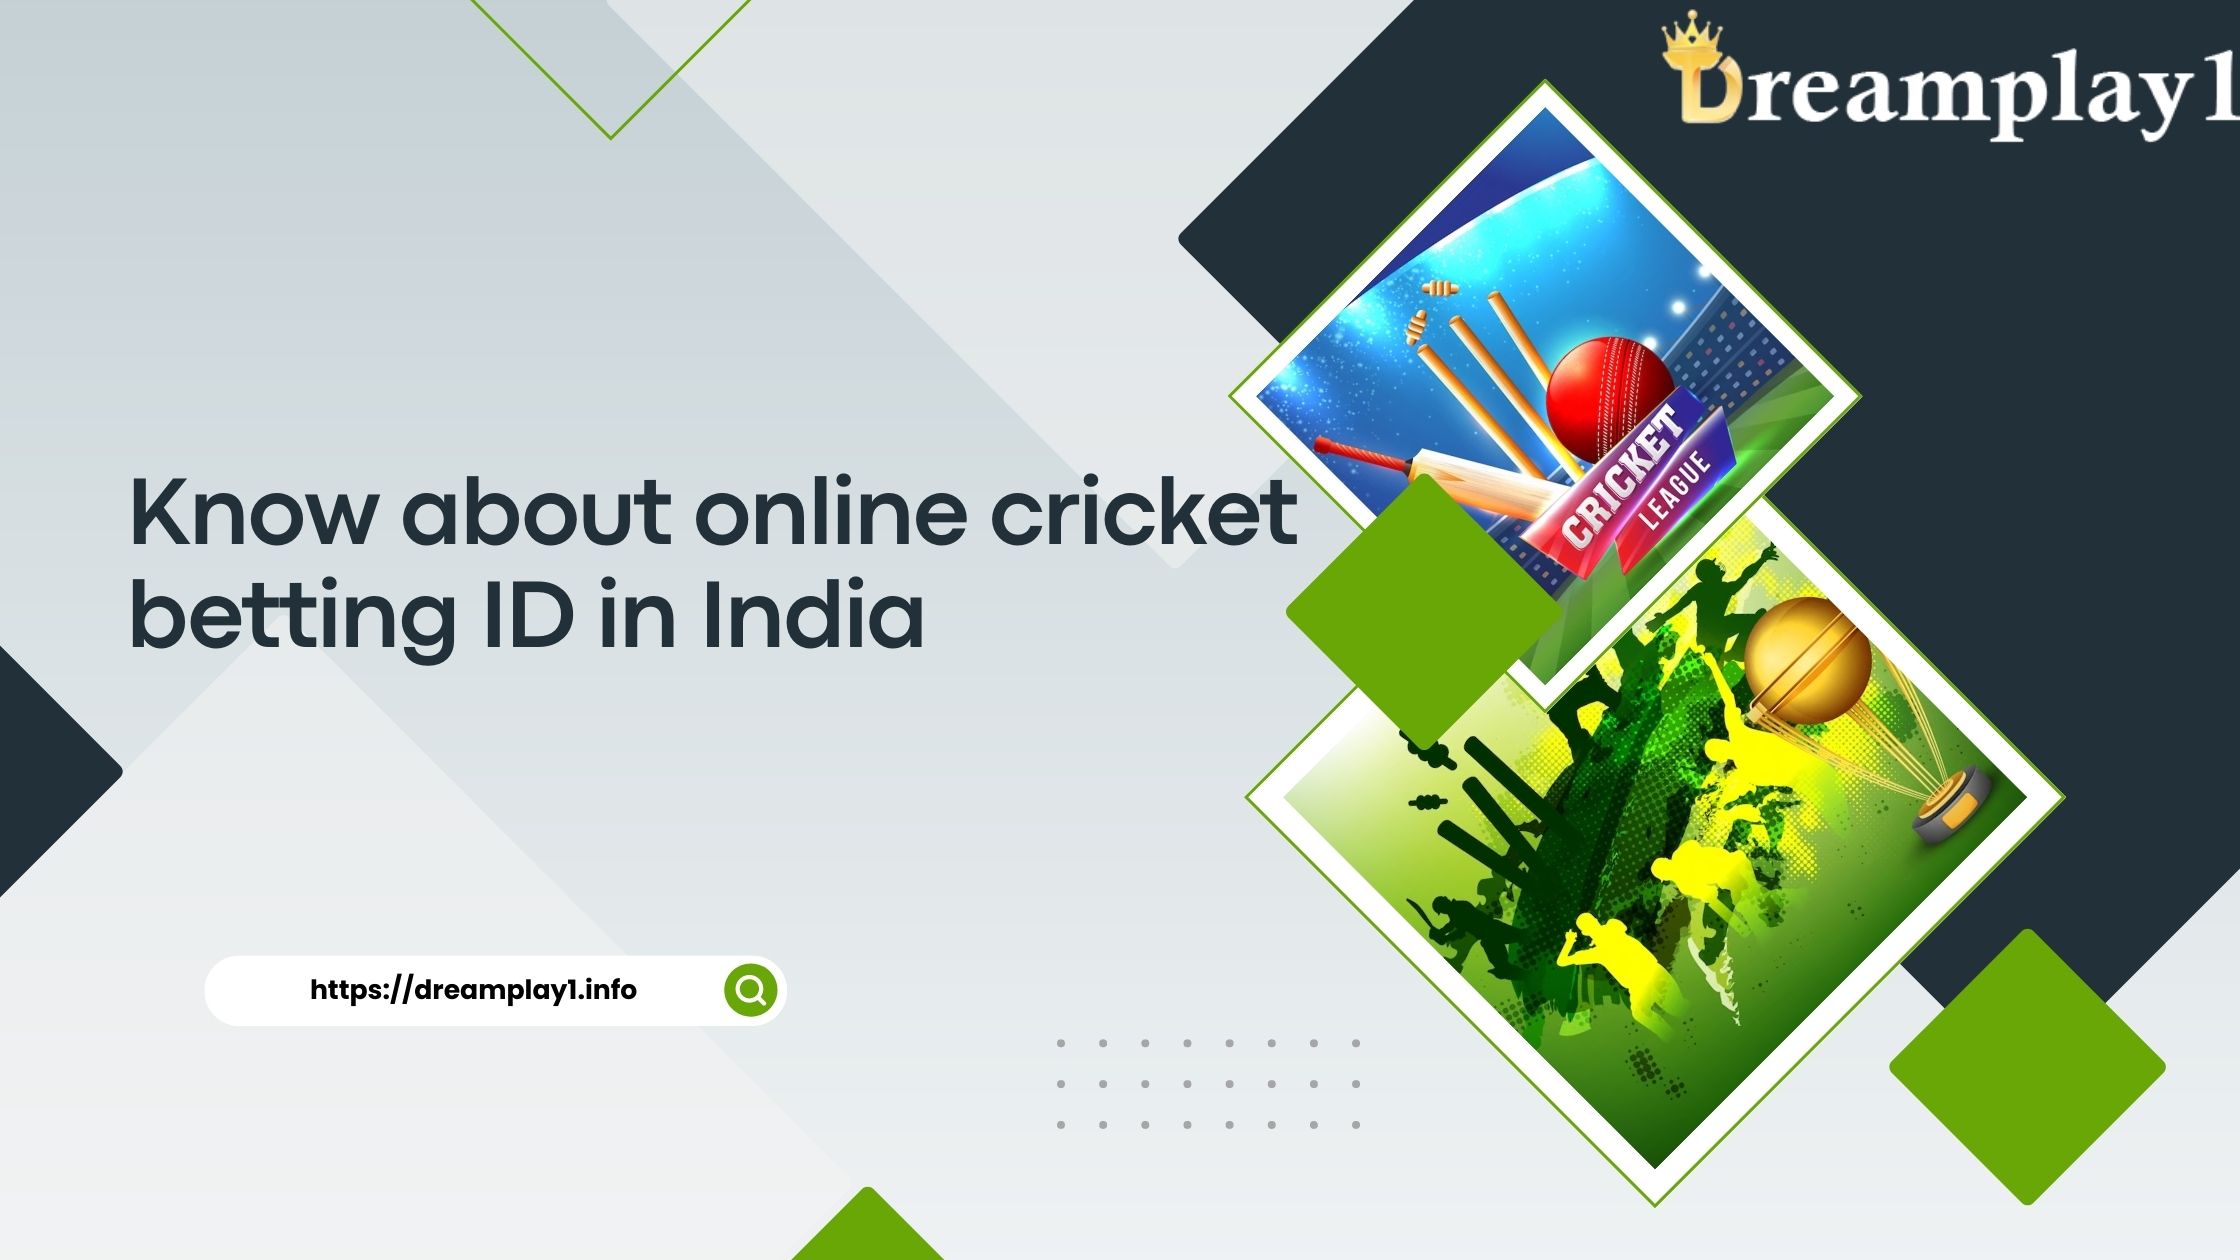 Online cricket betting ID in India